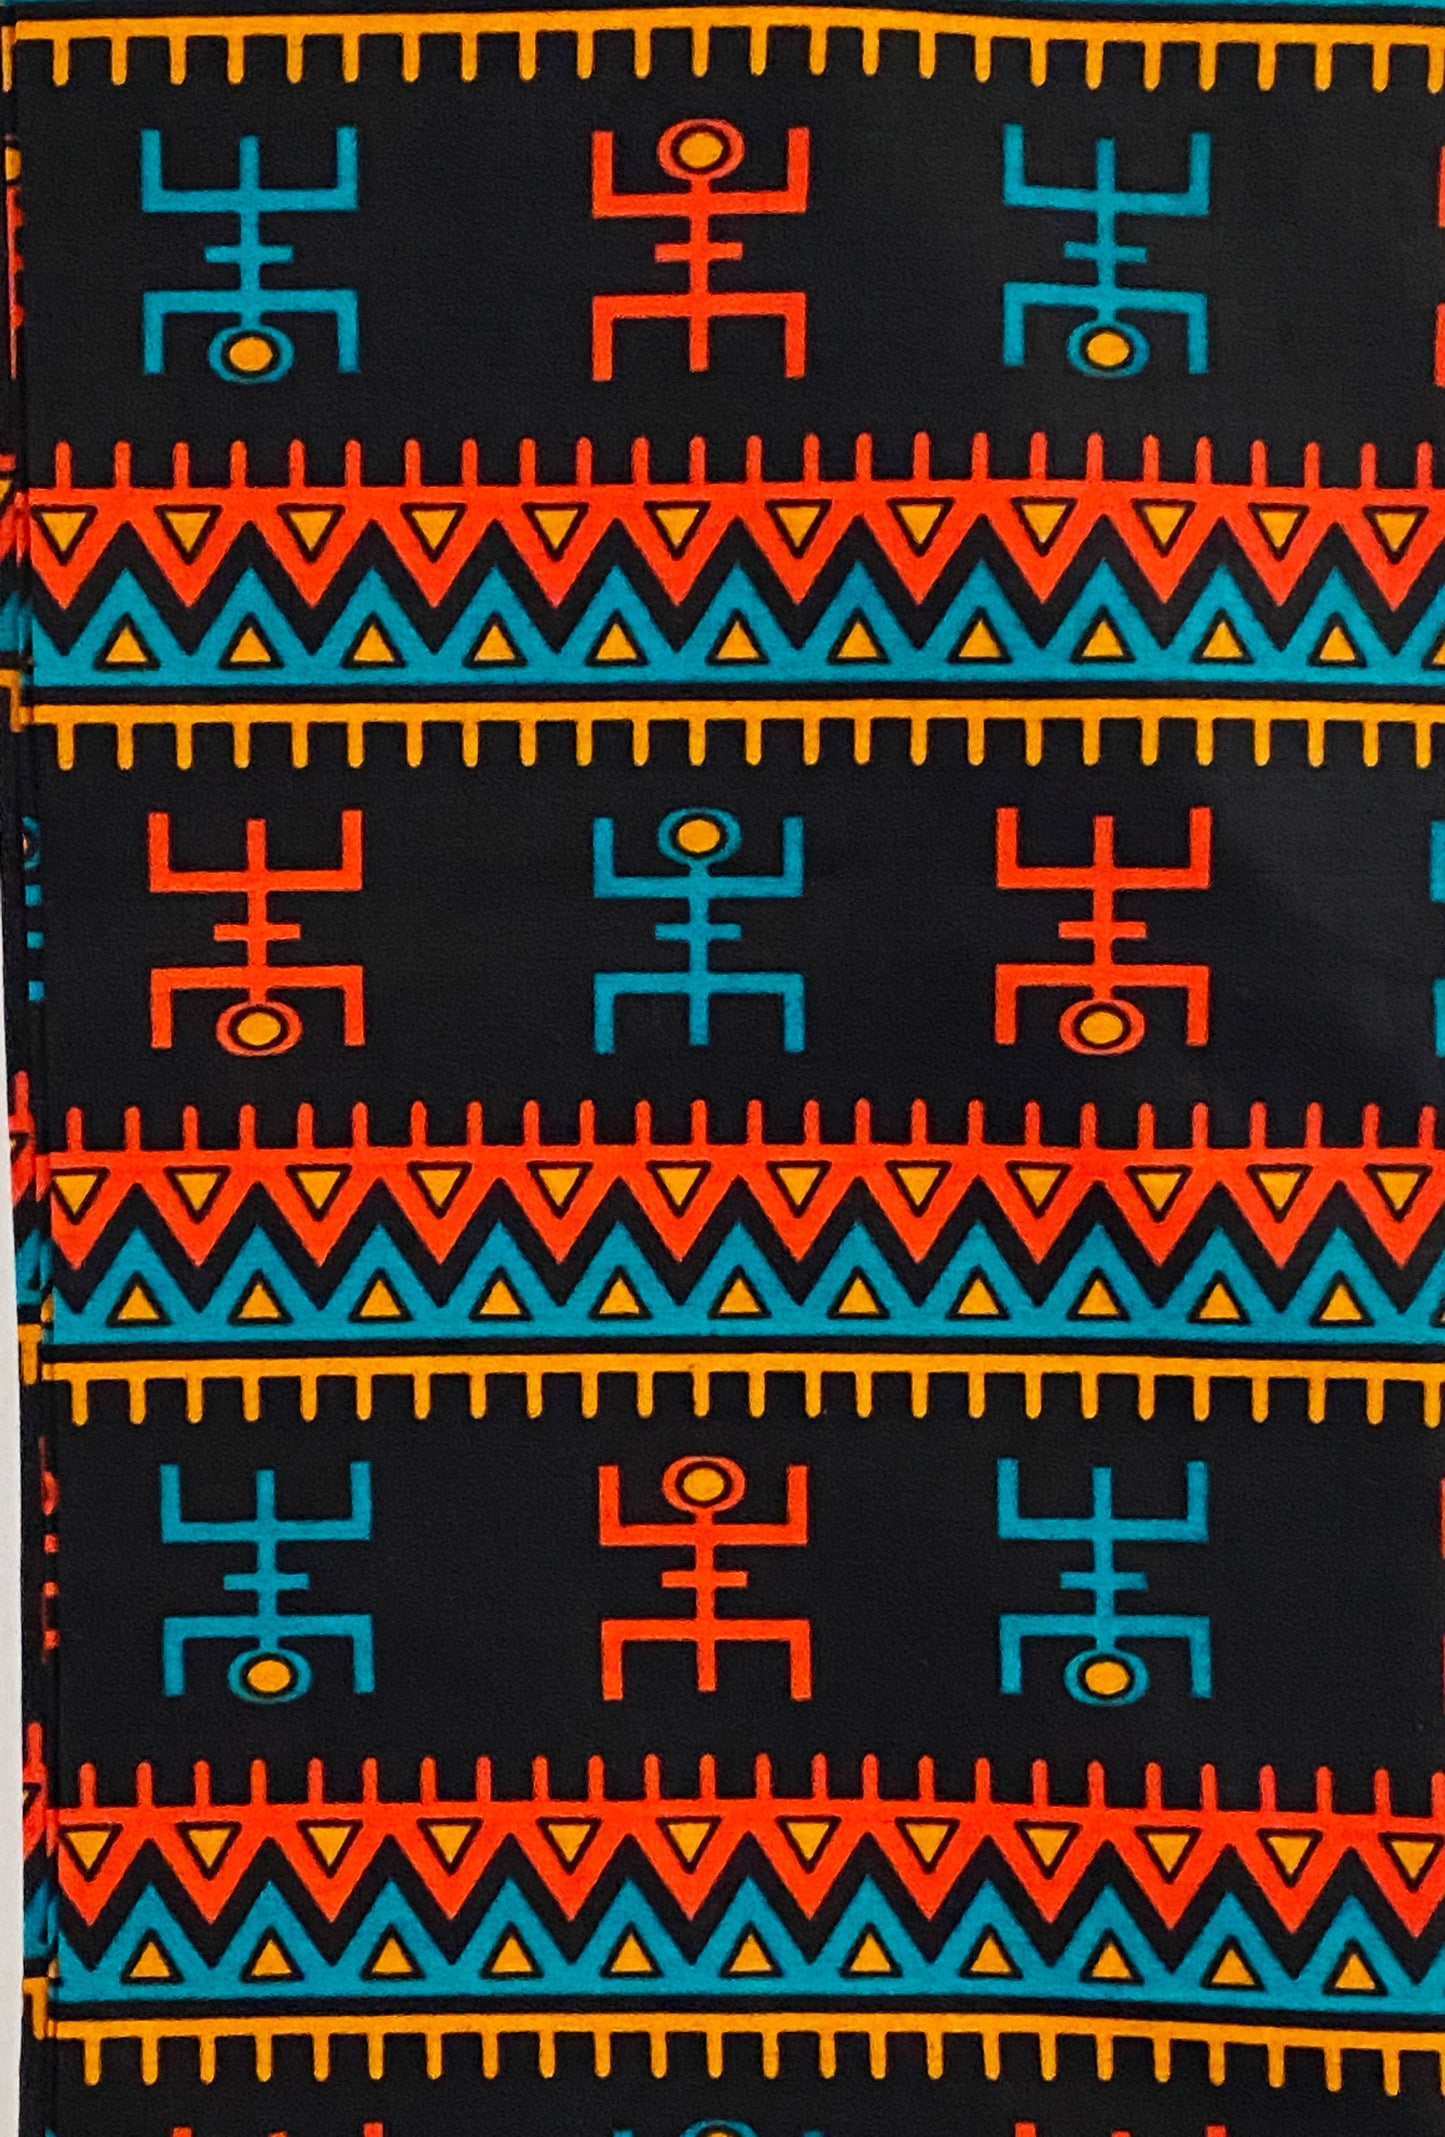 #3484 African Kente Cloth Cotton Fabric,6 Yards by 43"